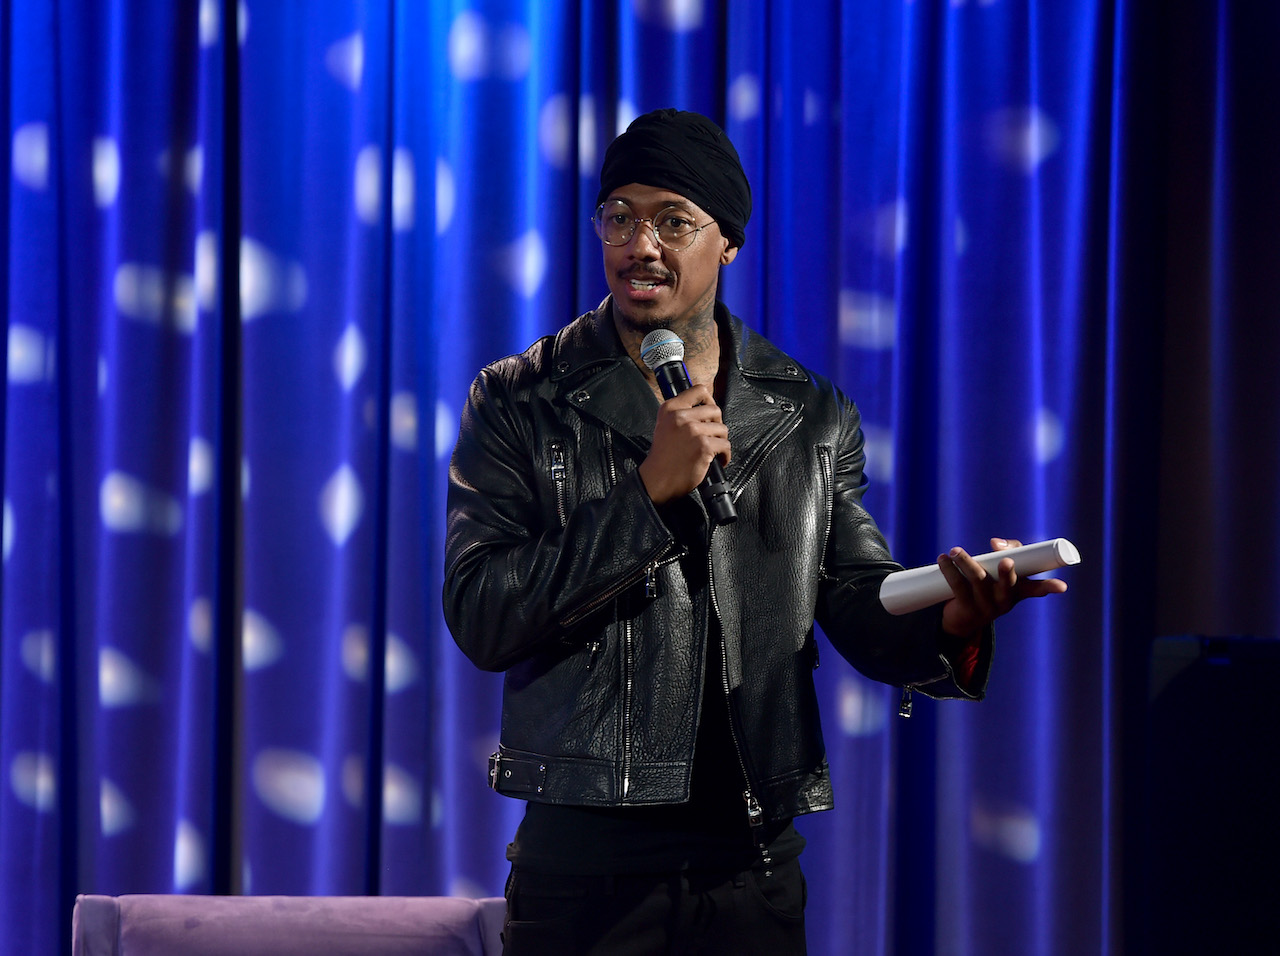 Nick Cannon on stage; Cannon says he failed miserably at monogamy 